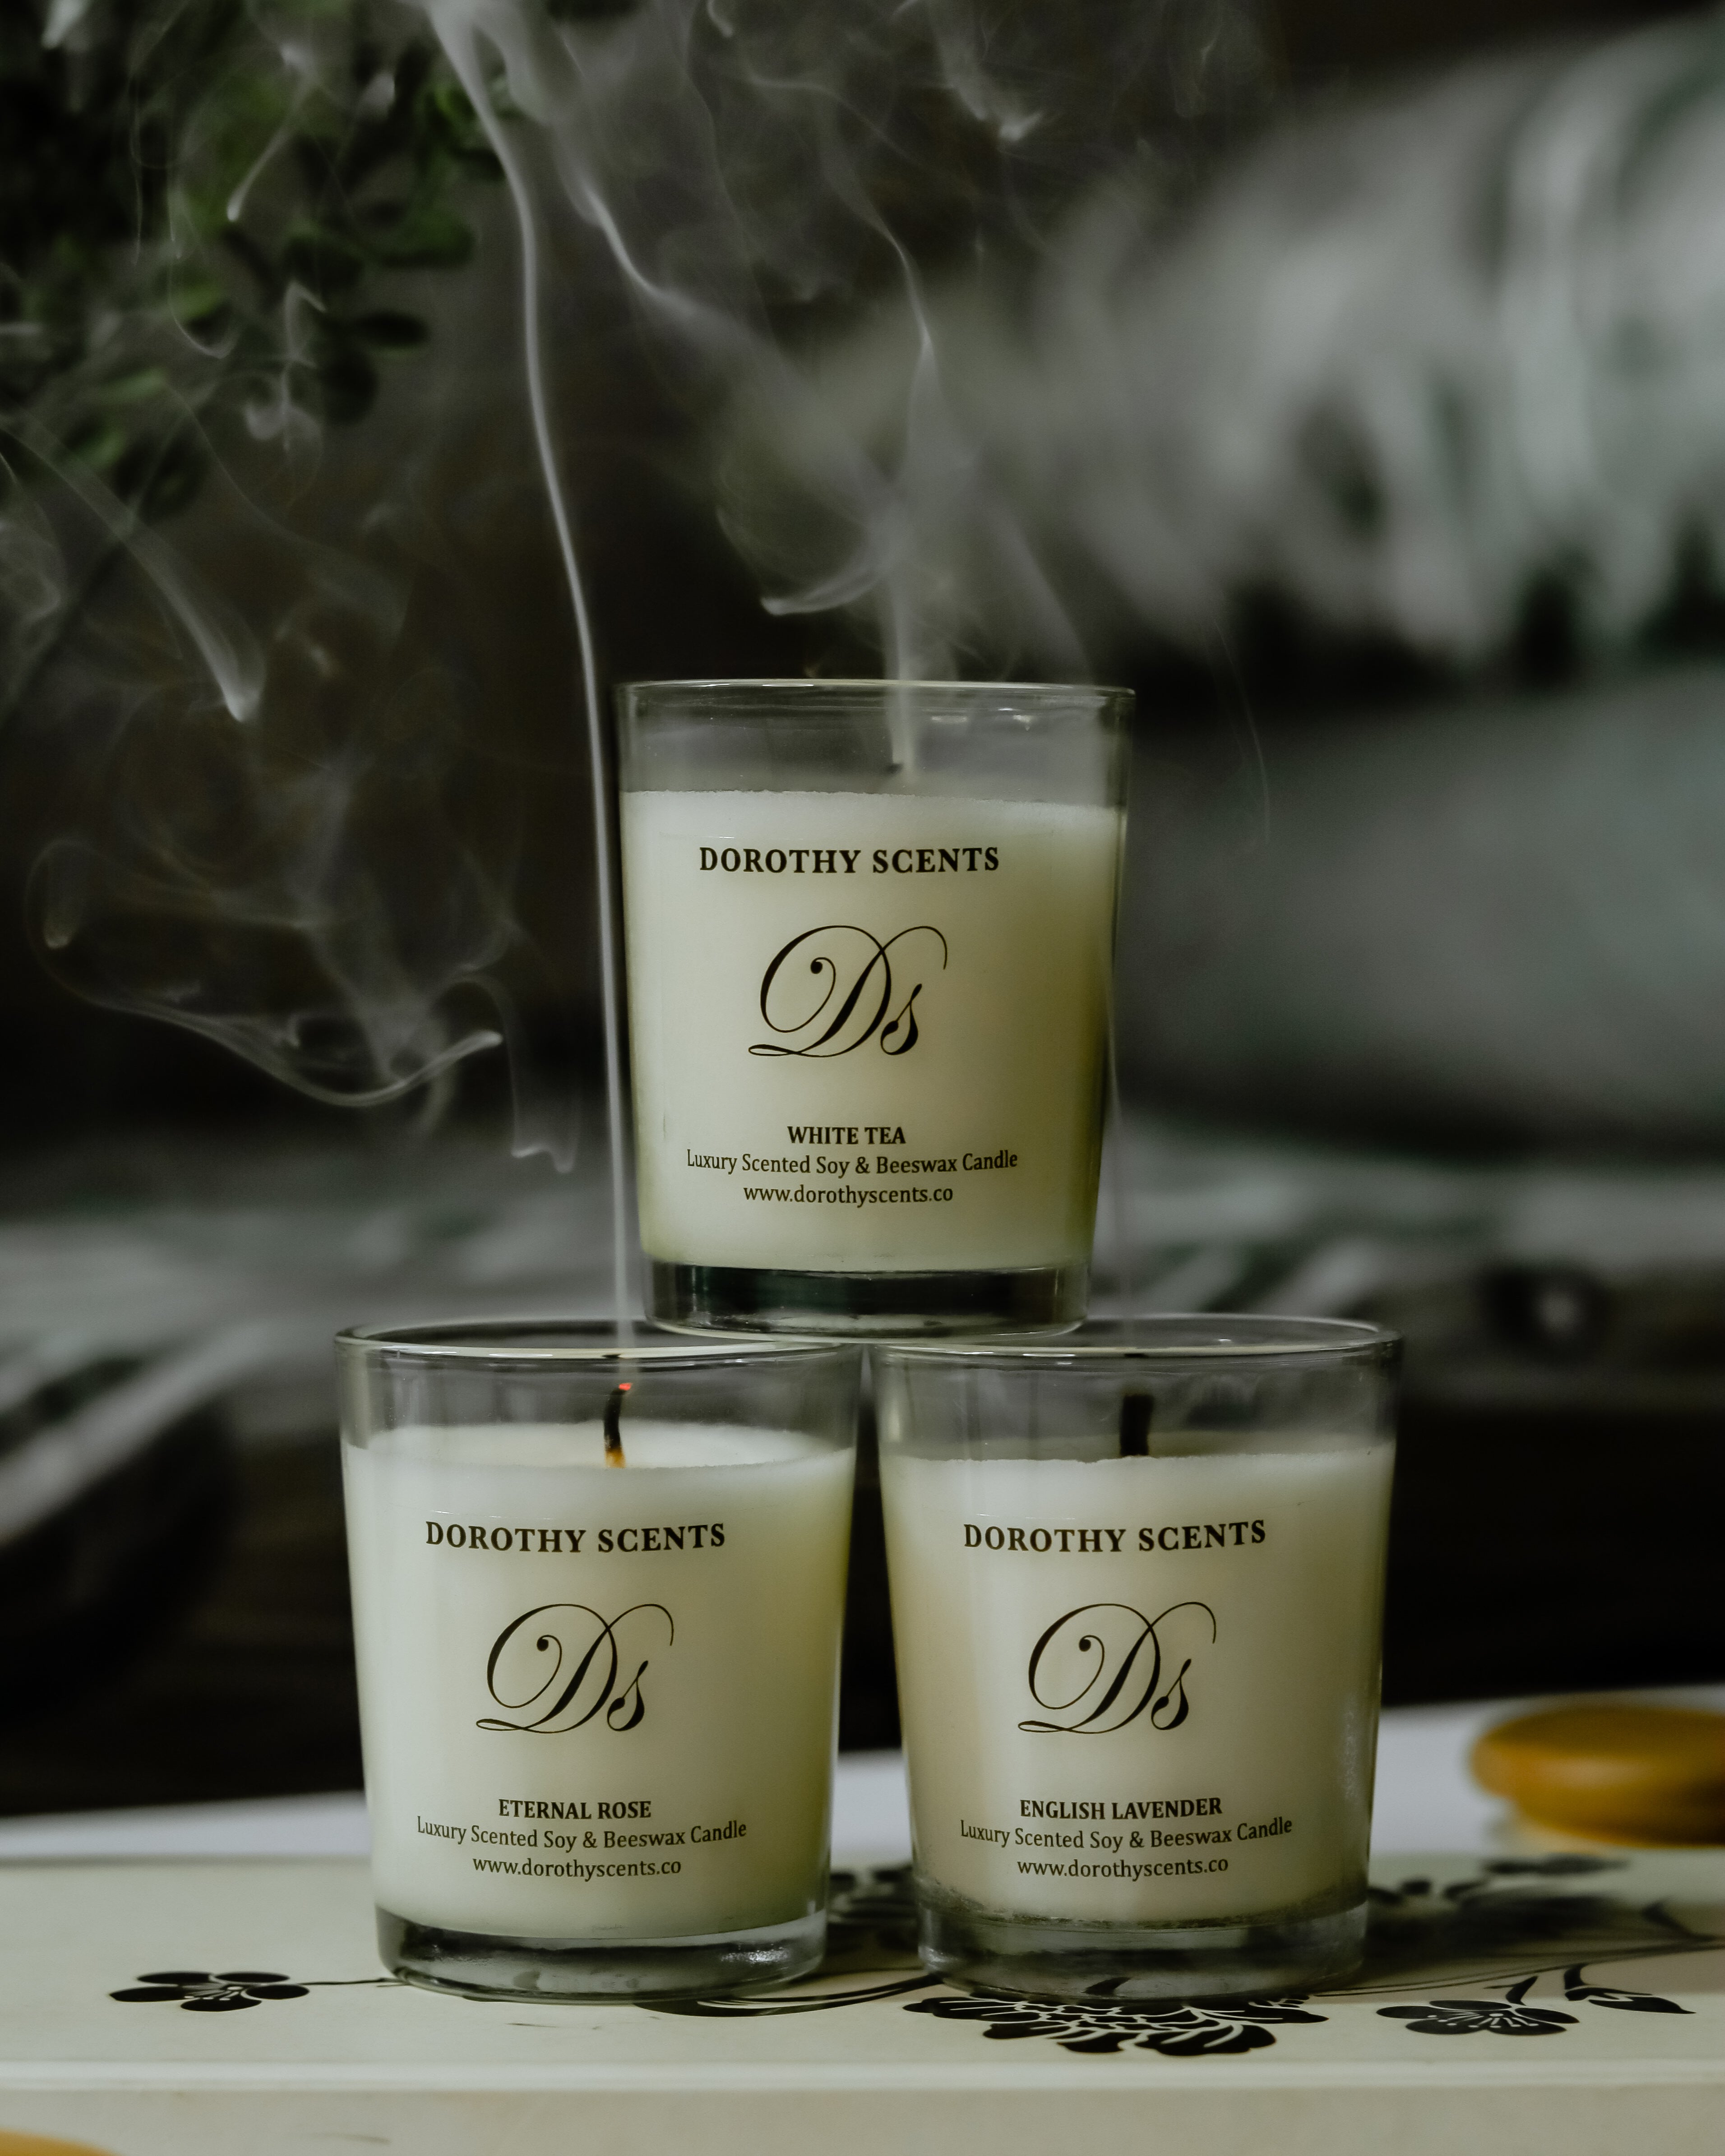 Scented Candle Relaxation Aromatherapy Aroma create a romantic atmosphere